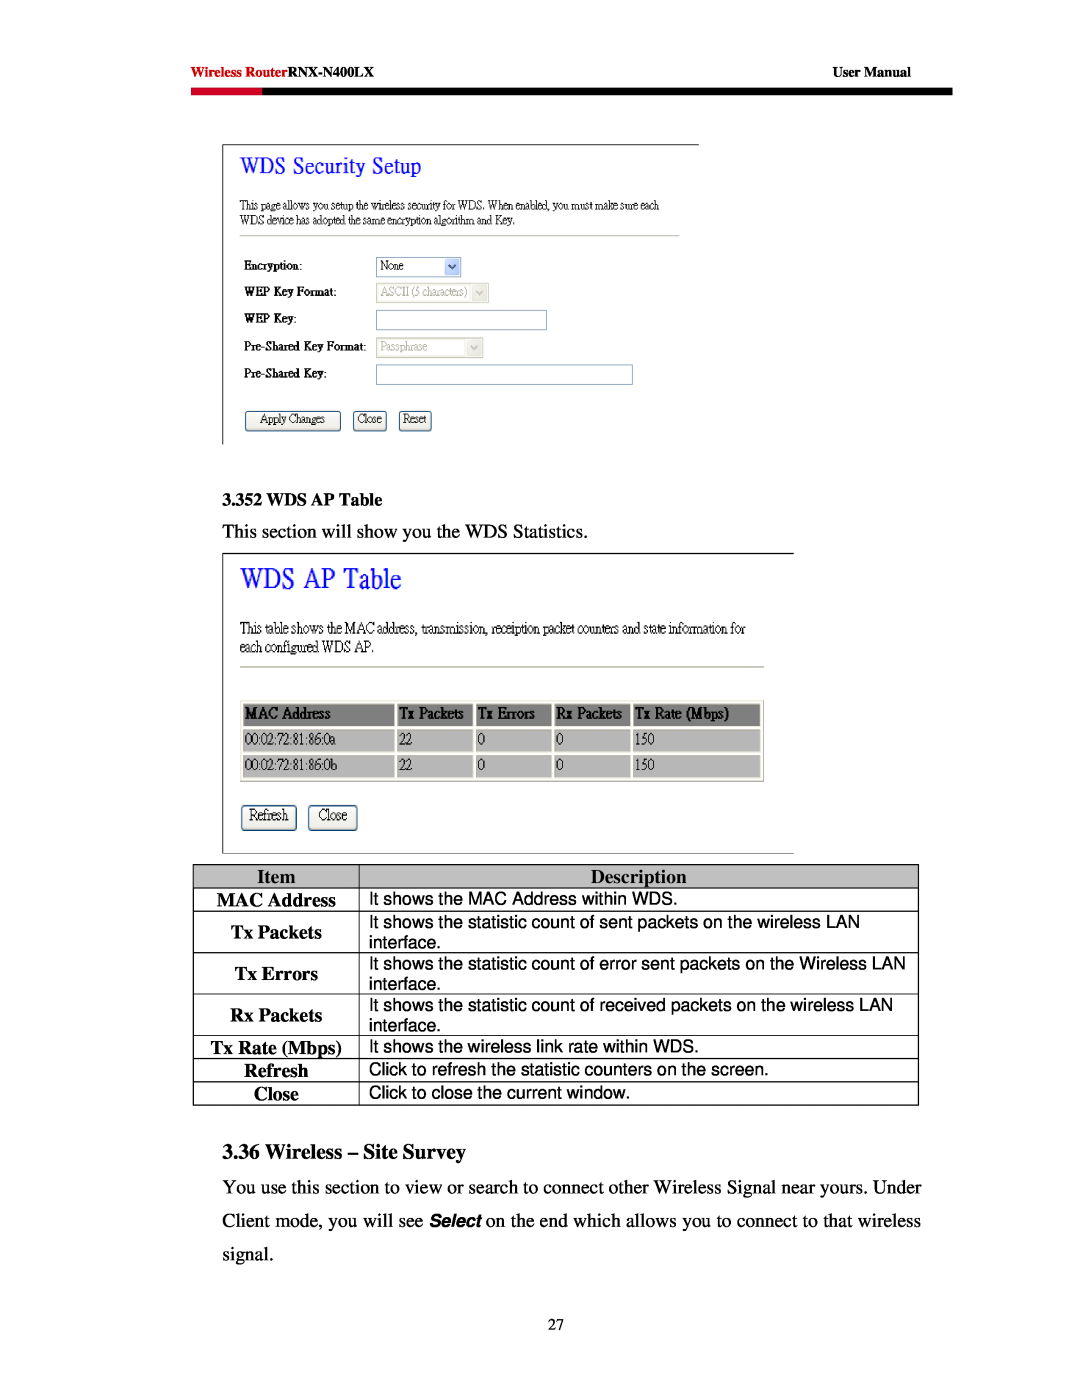 Rosewill RNX-N400LX user manual Wireless - Site Survey, This section will show you the WDS Statistics, Description 